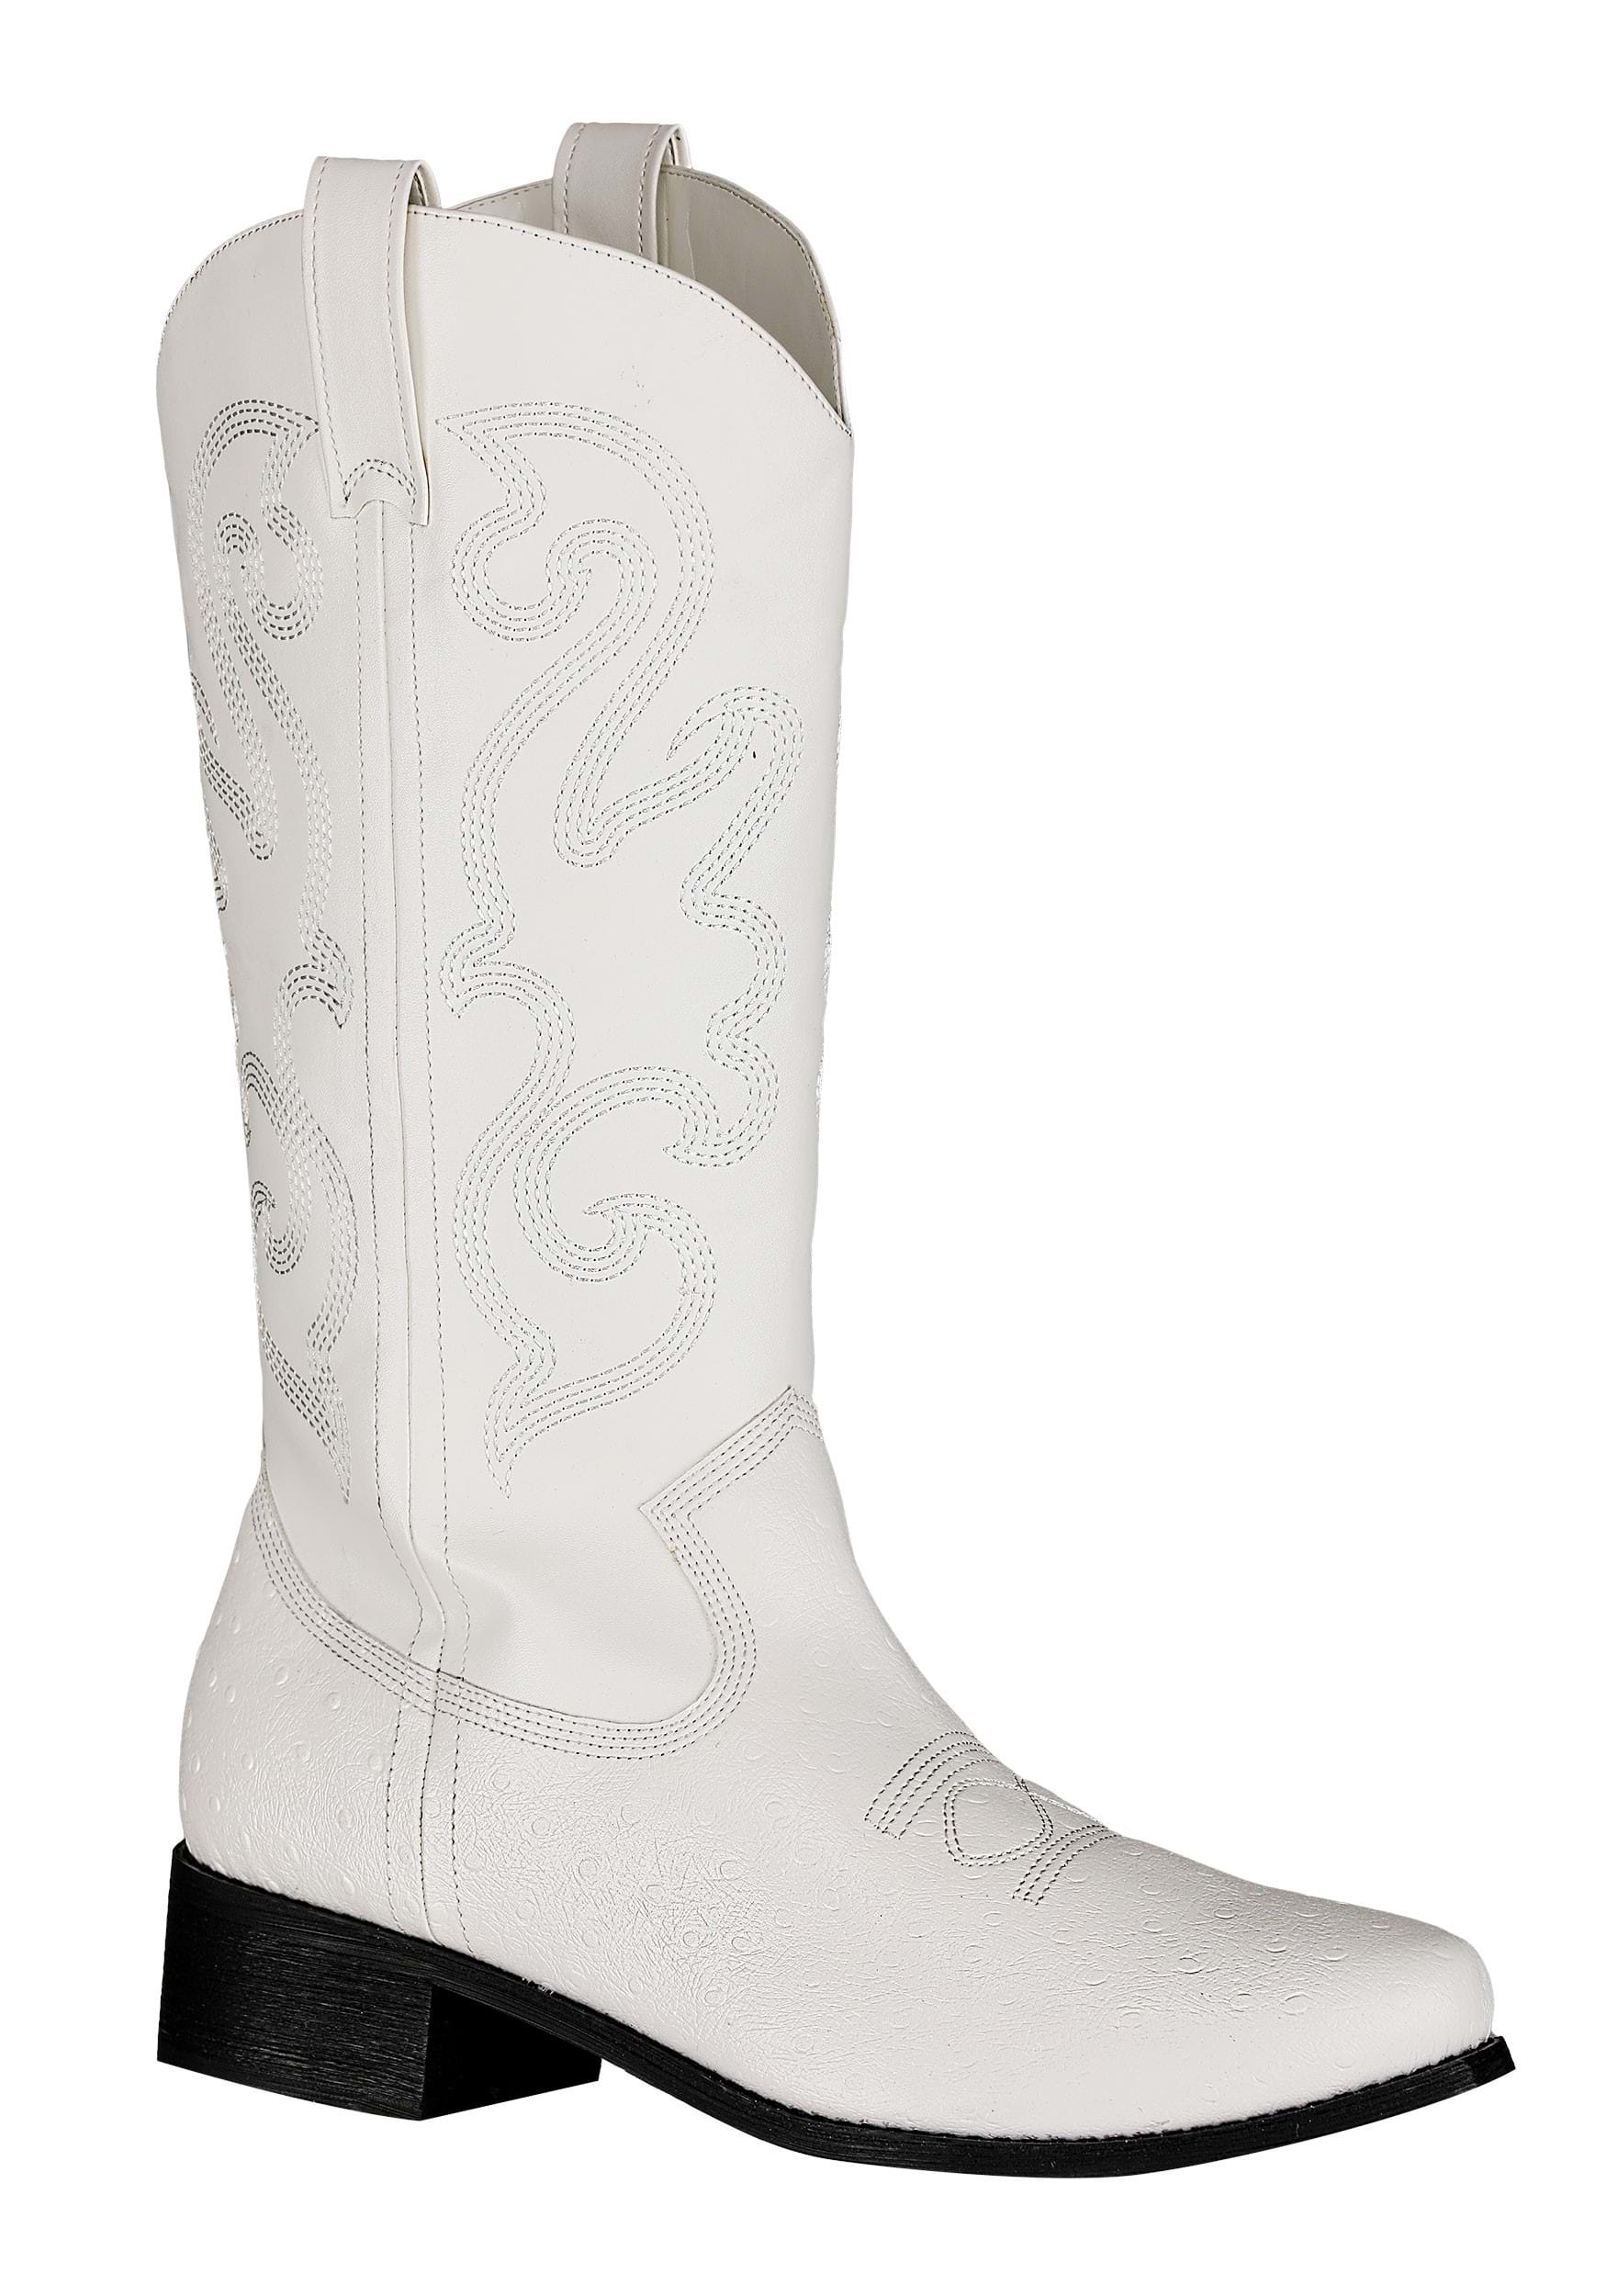 White Cowboy Boots For Men , Costume Shoes For Adults